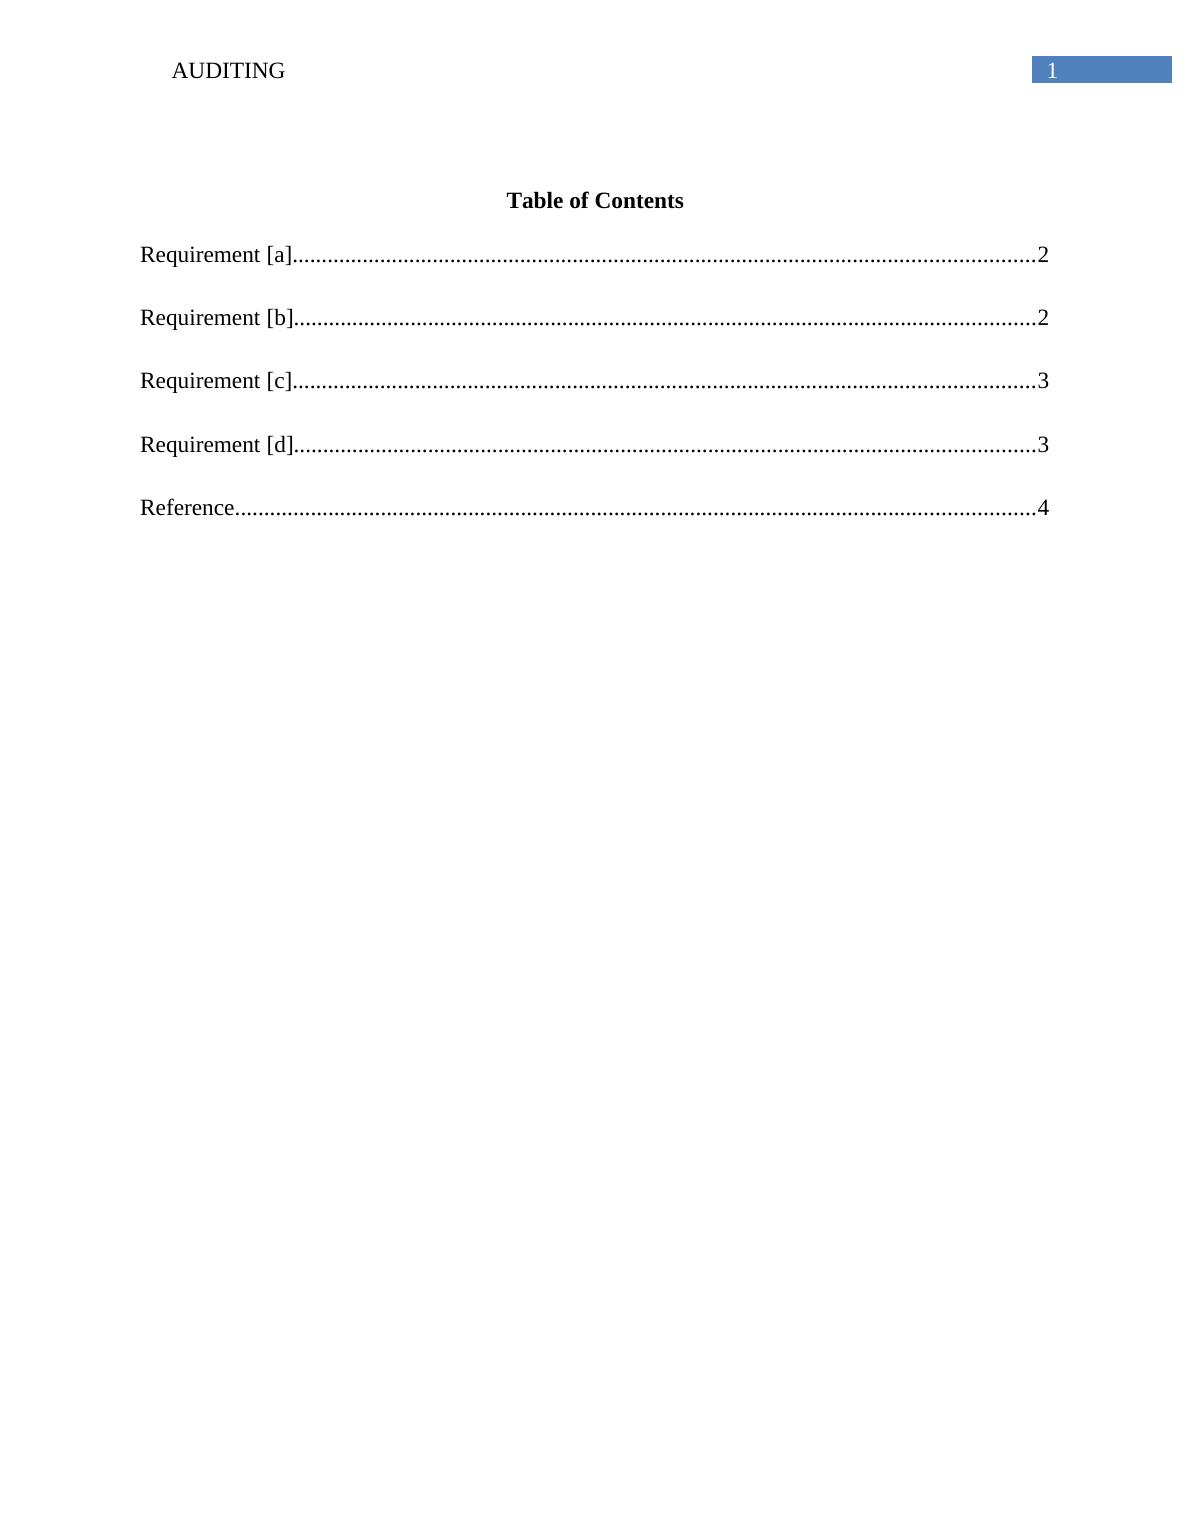 Assignment on Auditing PDF_2